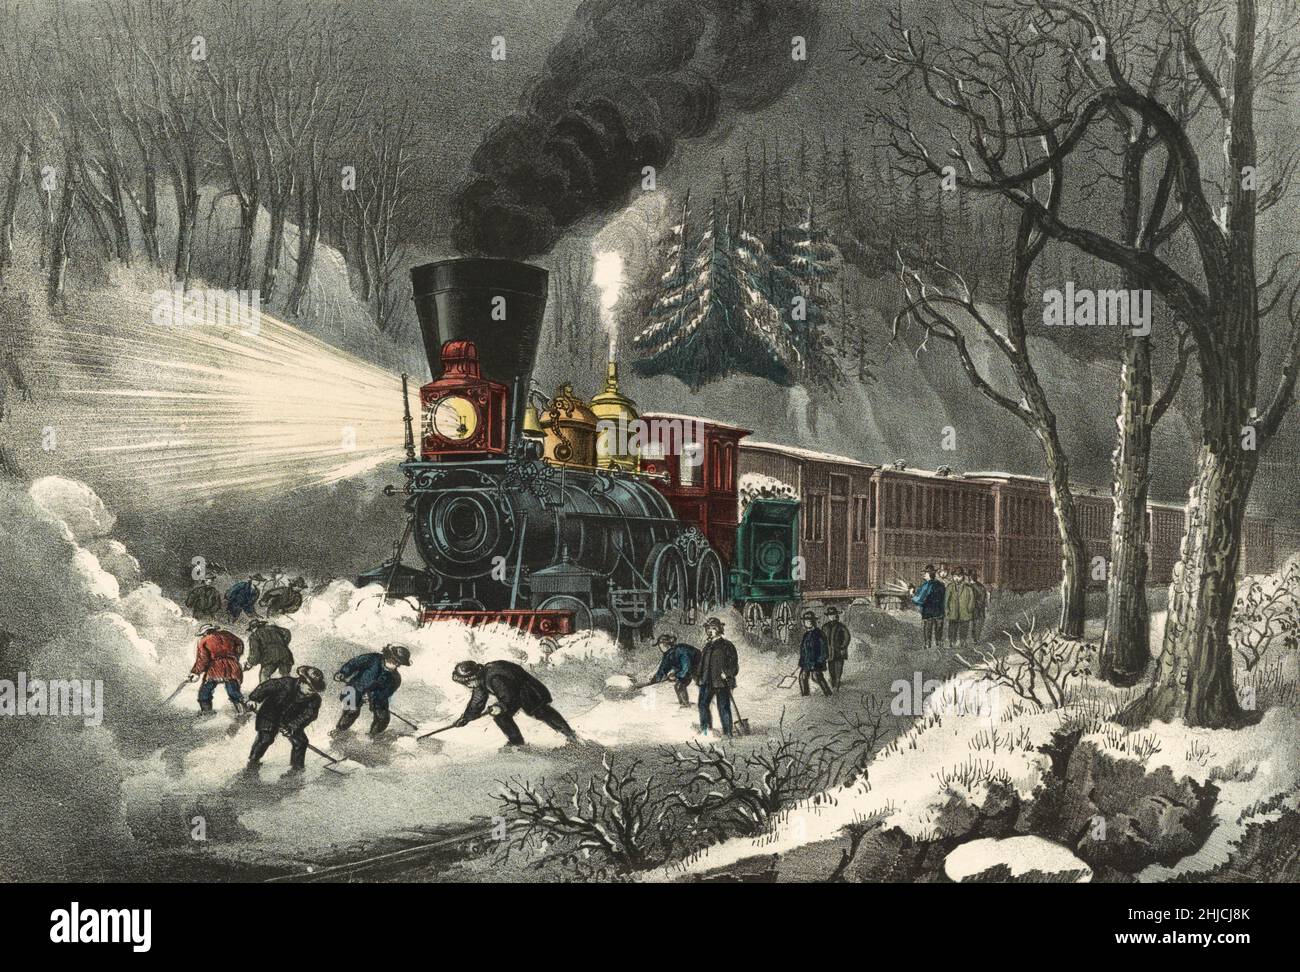 A snowbound train on the American railroad. Currier & Ives, 1871. Stock Photo